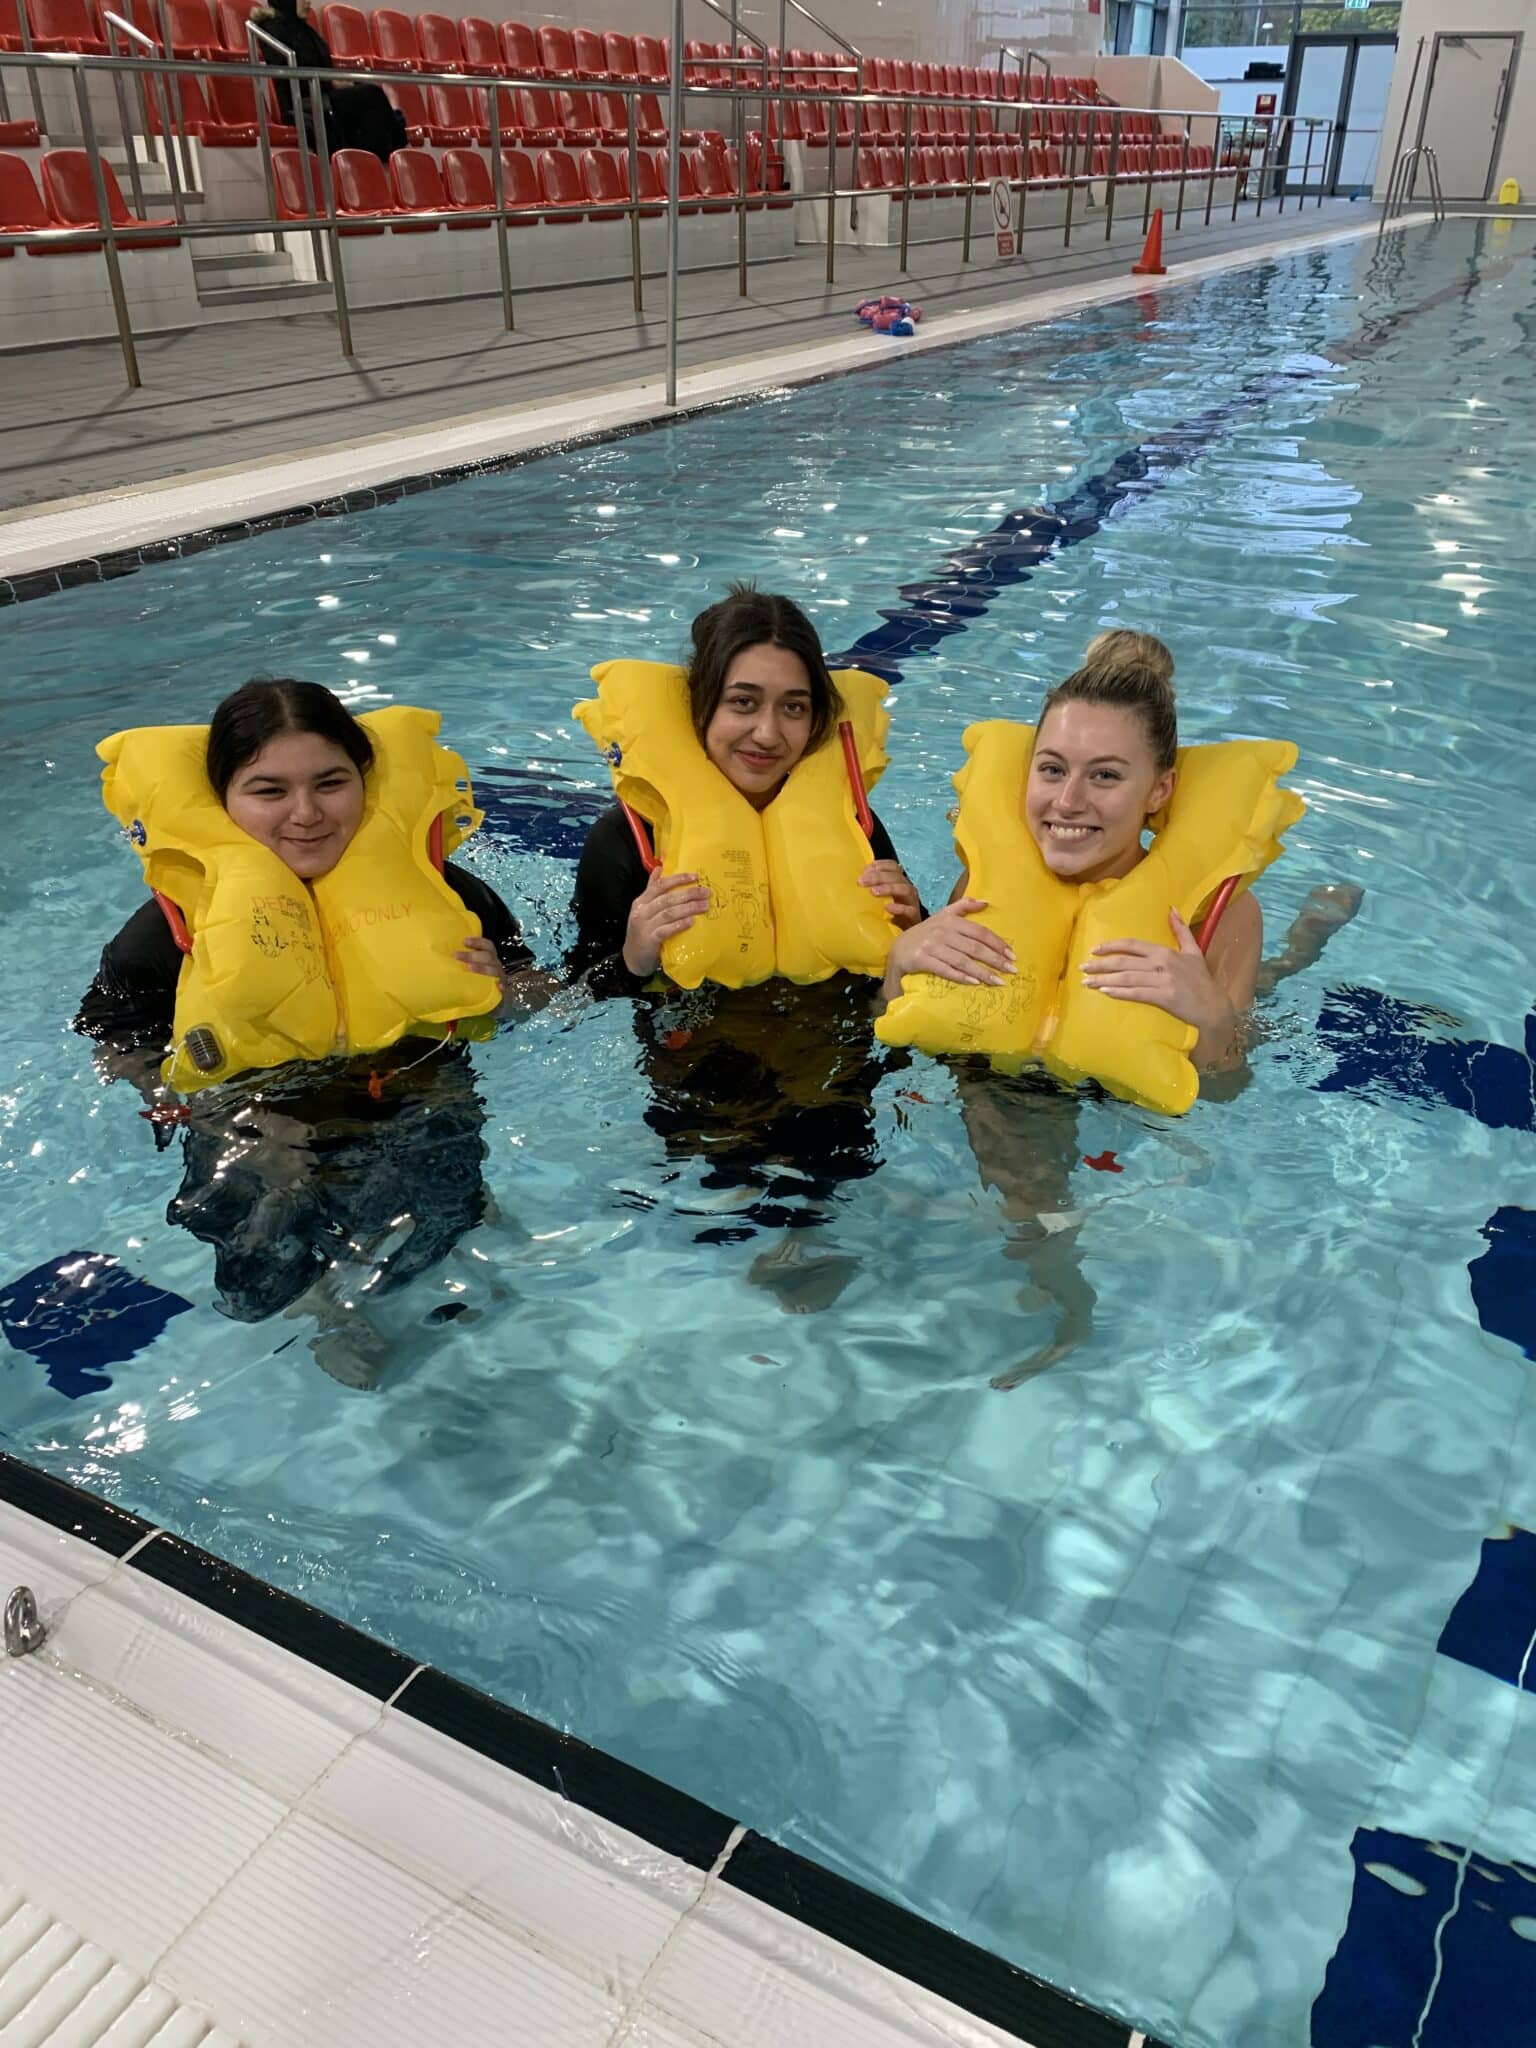 cabin crew students wearing life jackets in the pool